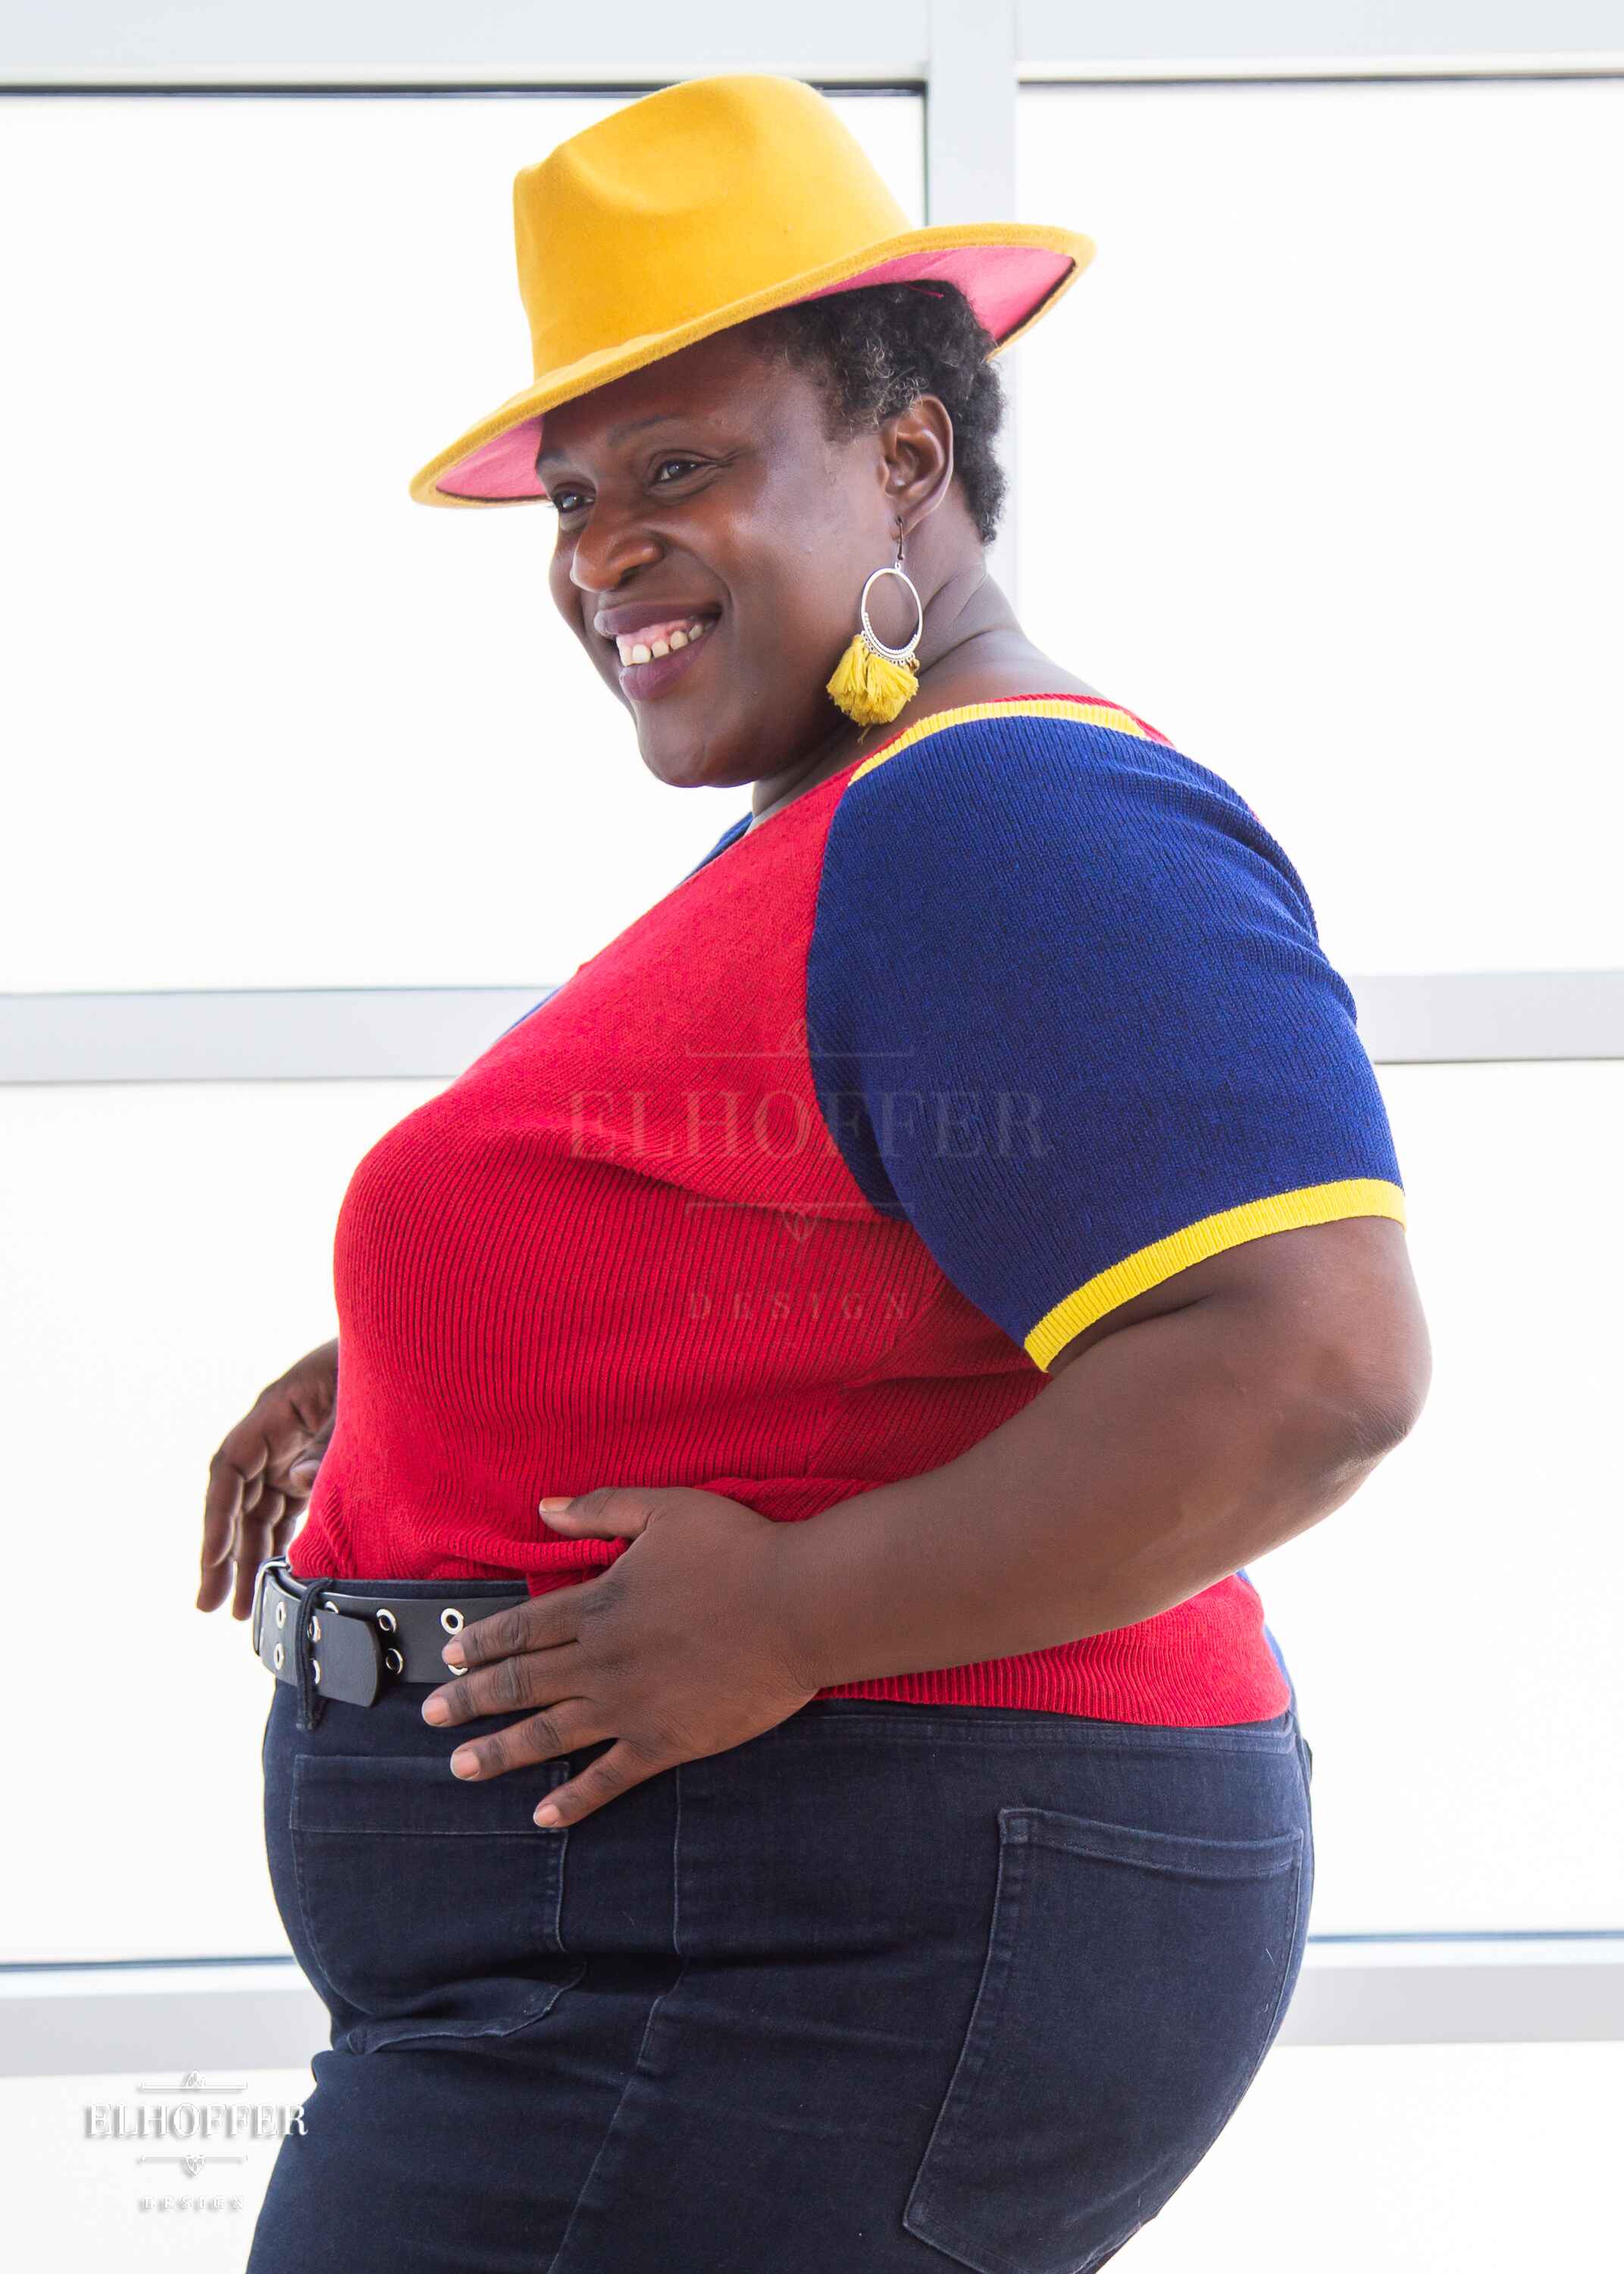 Adalgiza, a medium dark skinned 4xl model with short black super curly hair, is smiling while wearing a short sleeve knit top with alternating blue and red colors. There is yellow detailing along the top of the shoulder and around the cuff of the sleeve.